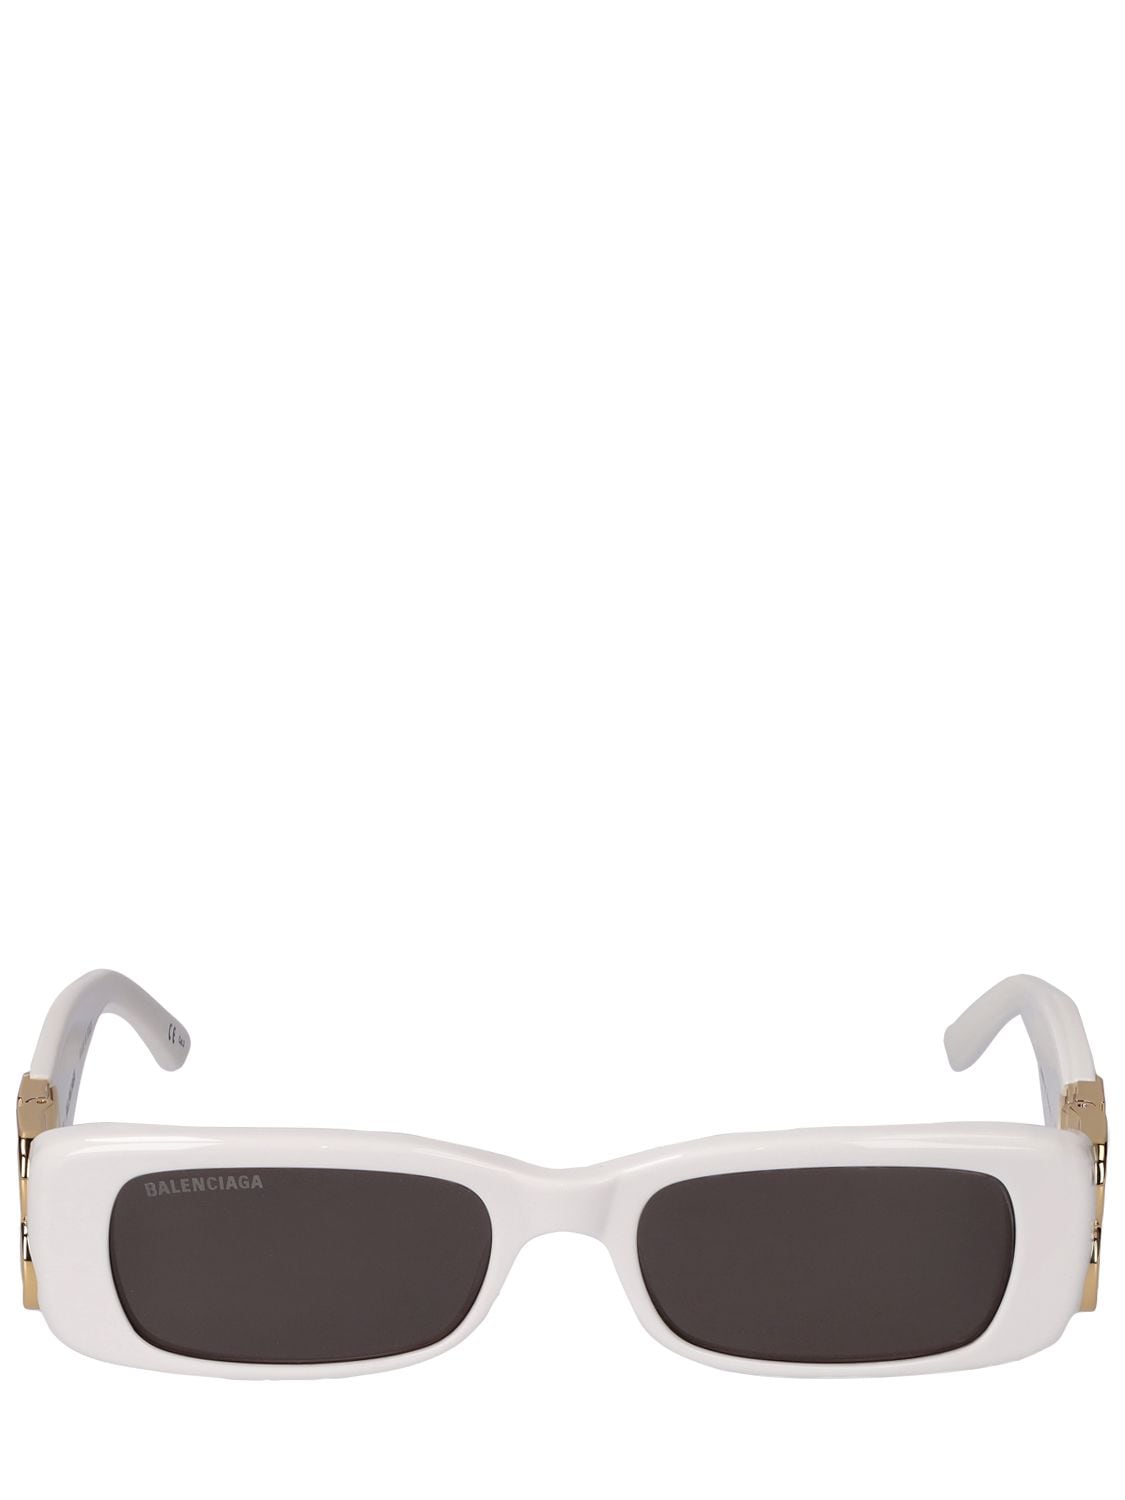 Image of 0096s Dynasty Acetate Sunglasses